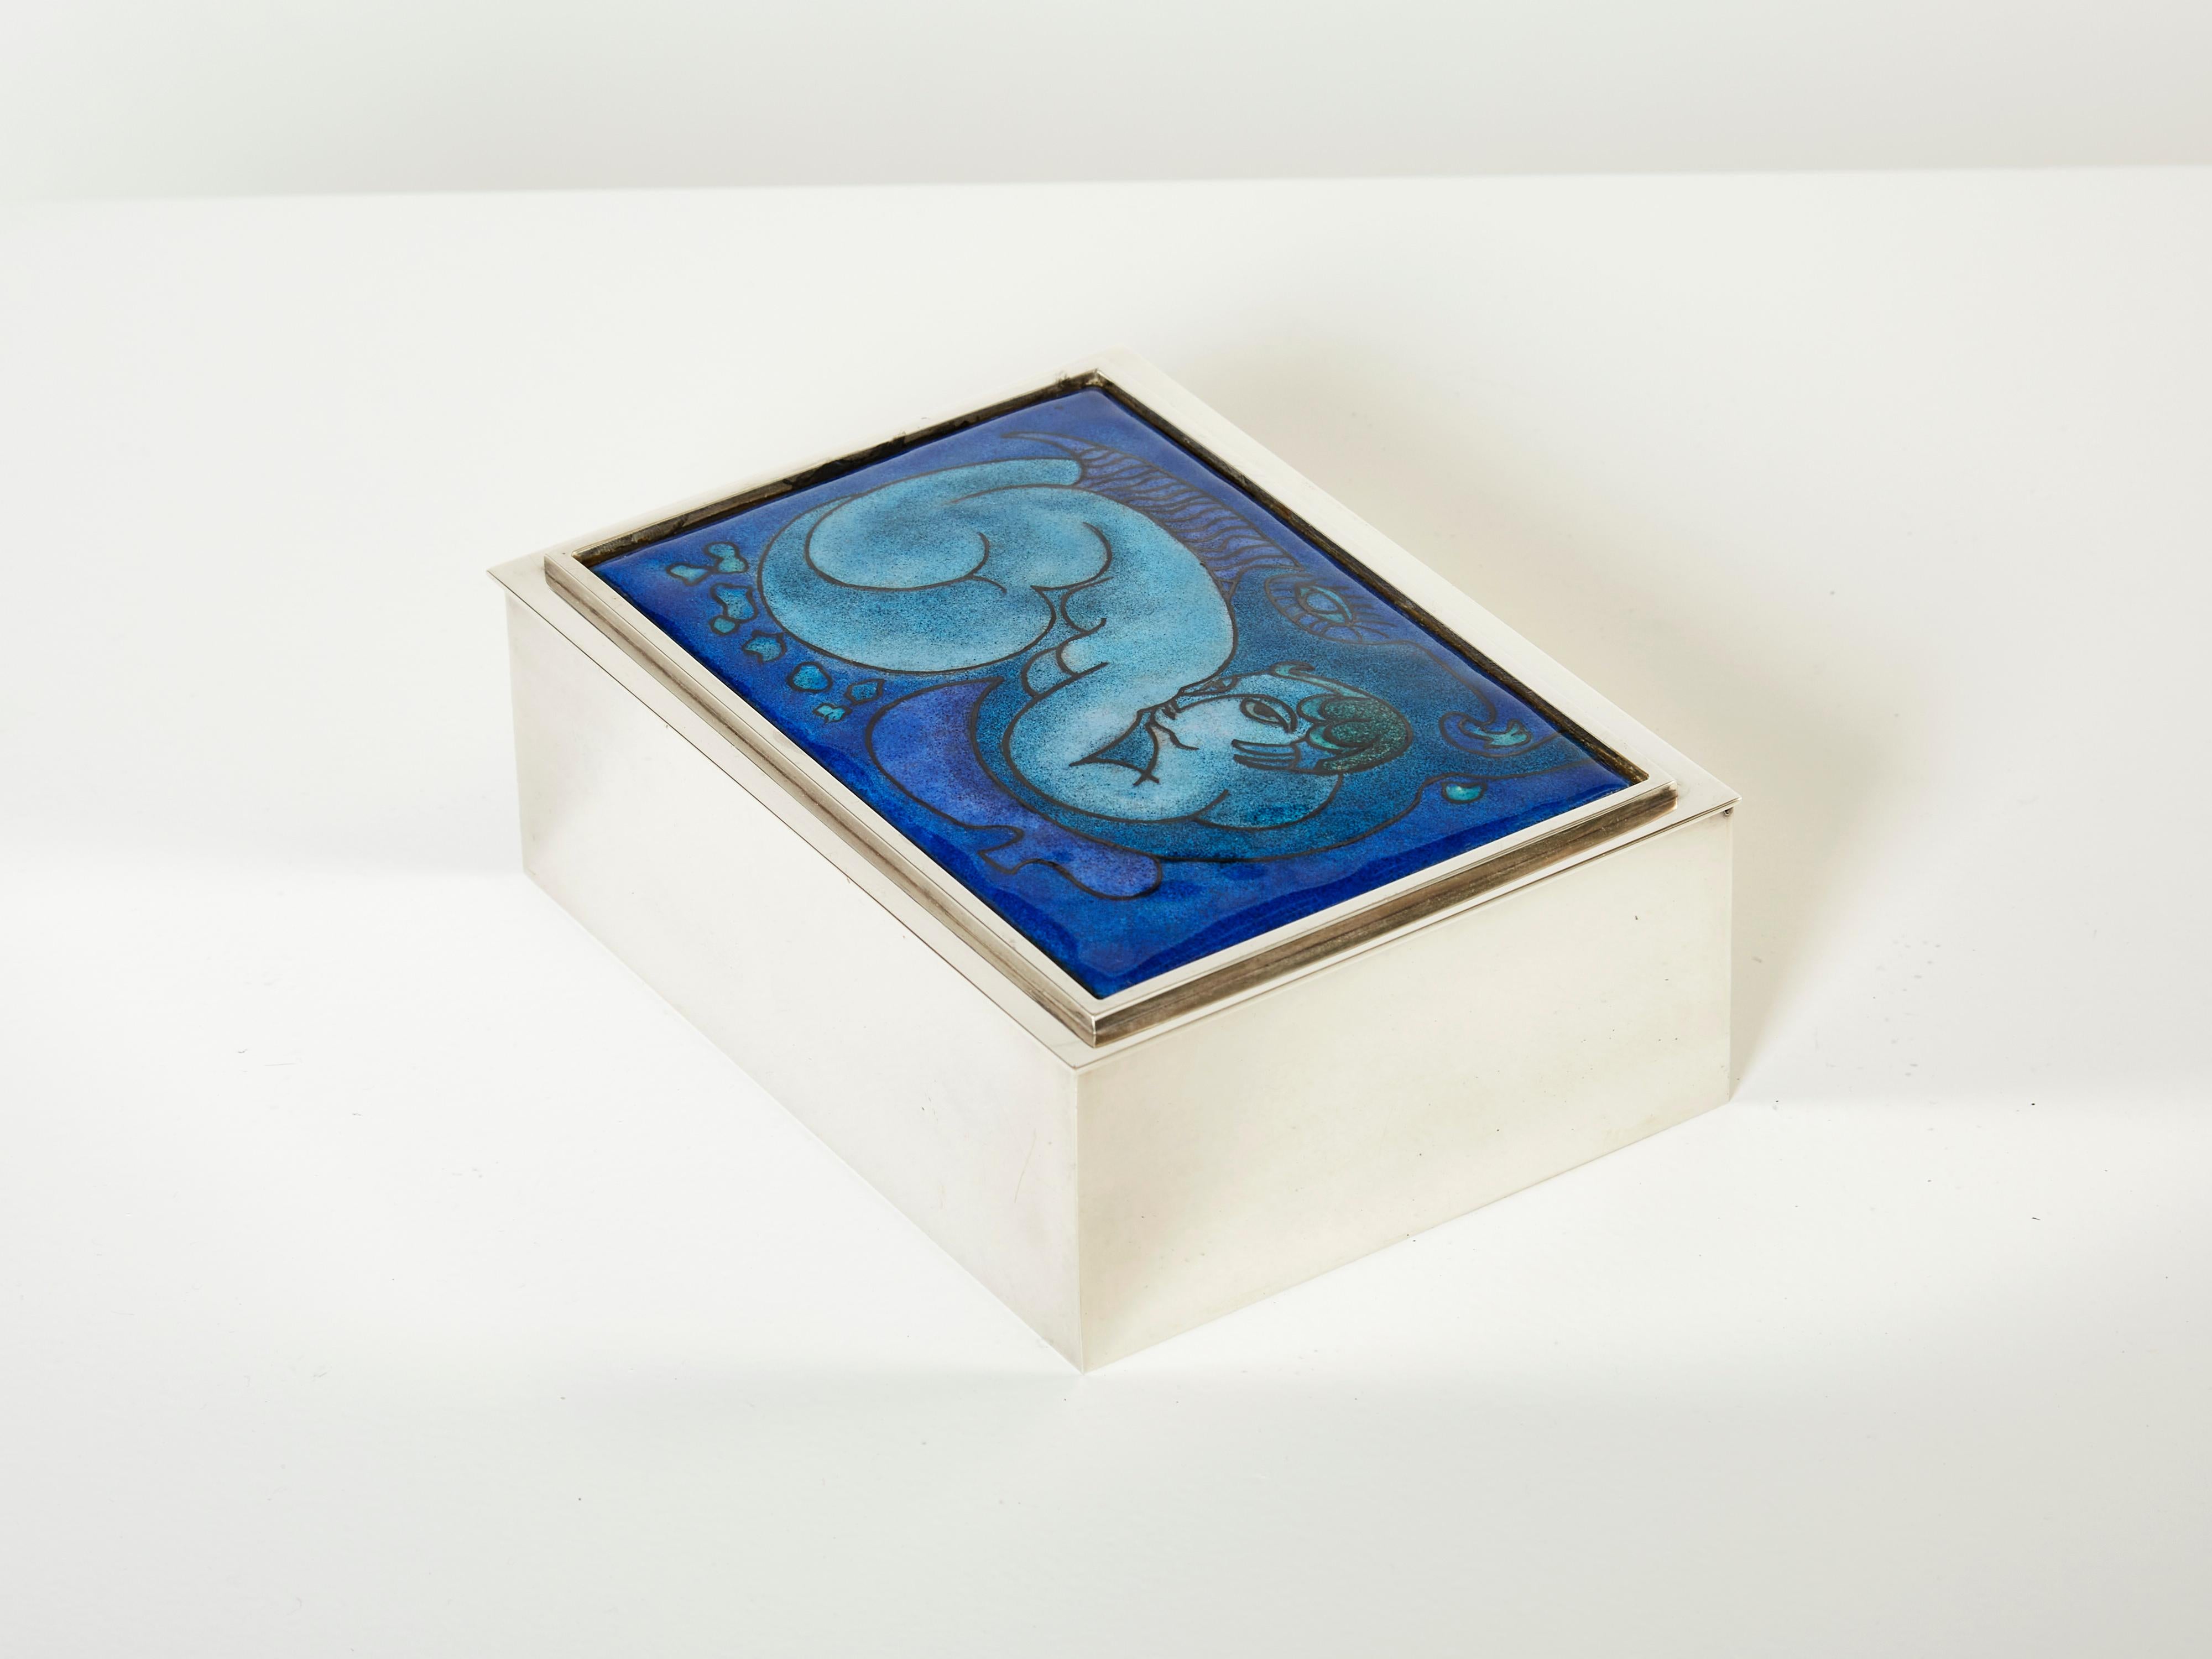 Beautiful French midcentury silvered decorative box produced by Crevillen Paris in the early 1970s. This jewellery box features a beautiful enameled blue ceramic top depicting a woman, with an interior covered with beechwood. The mix of silver,